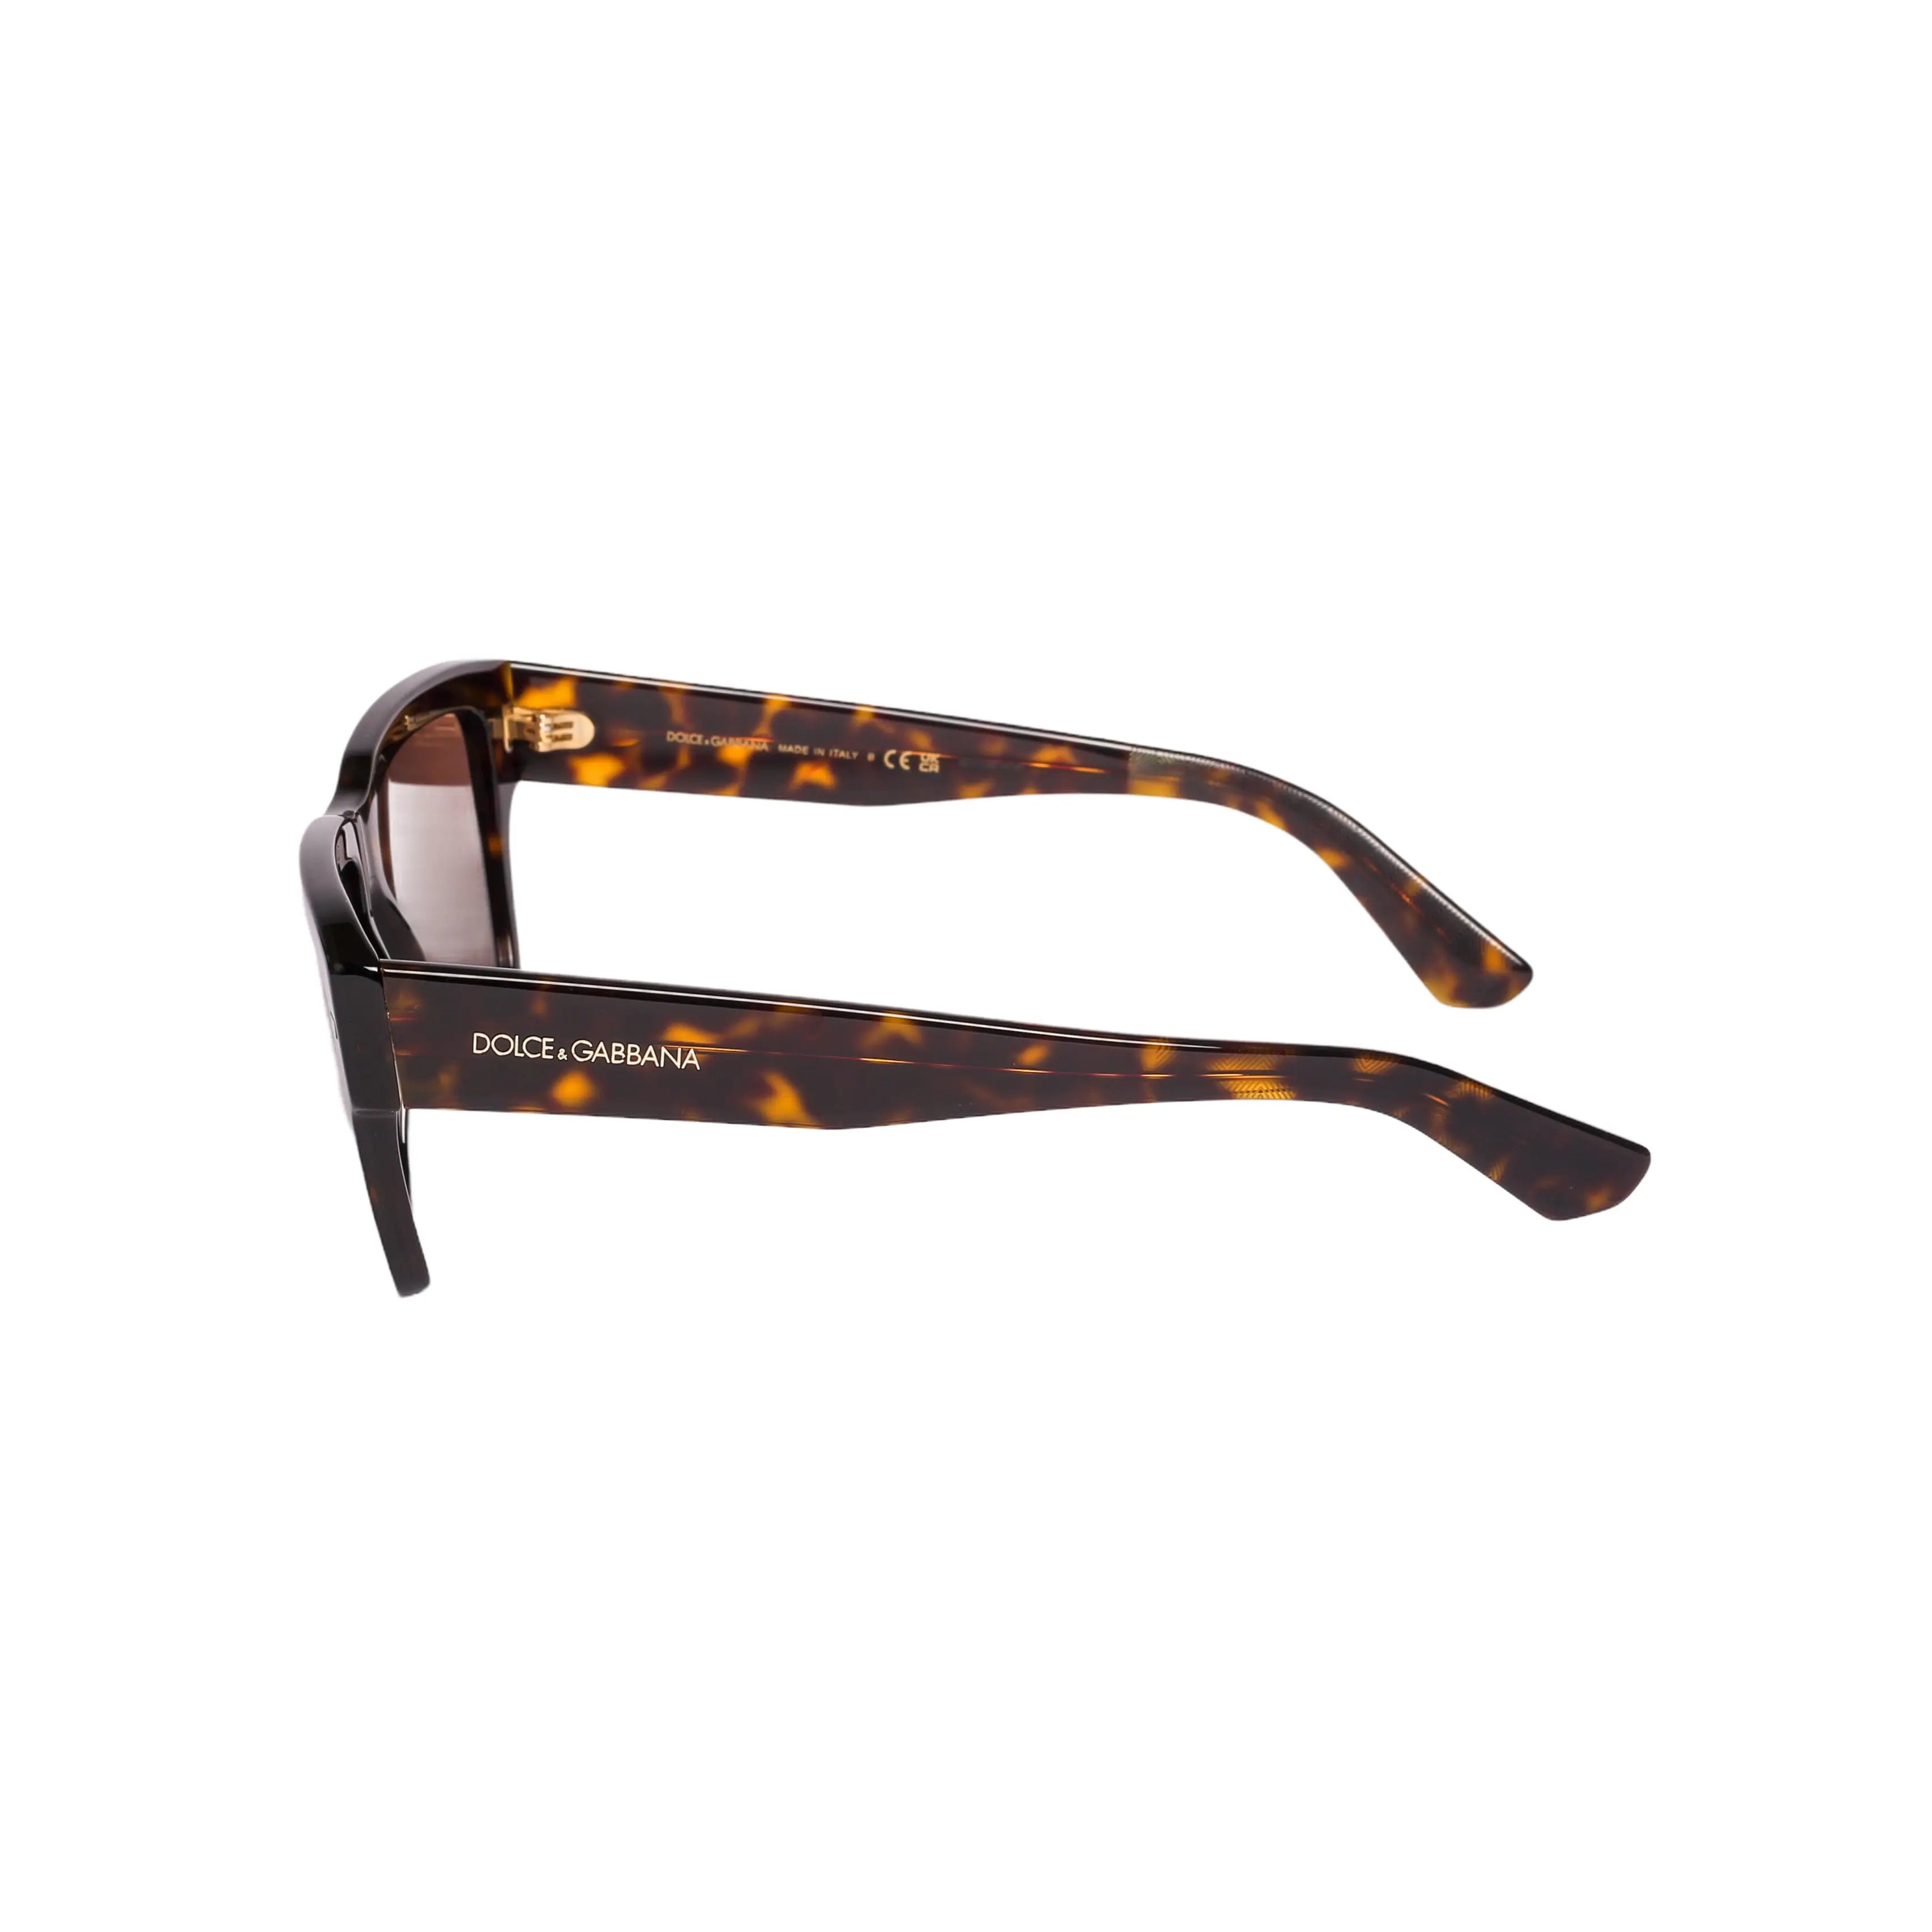 Dolce & Gabbana (D&G) DG 4431-55-502/73 SunglassesWear the ultimate in sophistication and style with Dolce &amp; Gabbana's DG 4431-55-502/73 Sunglasses. Crafted from exquisite Tortoise Acetate and featuring UV400 prSunglasses